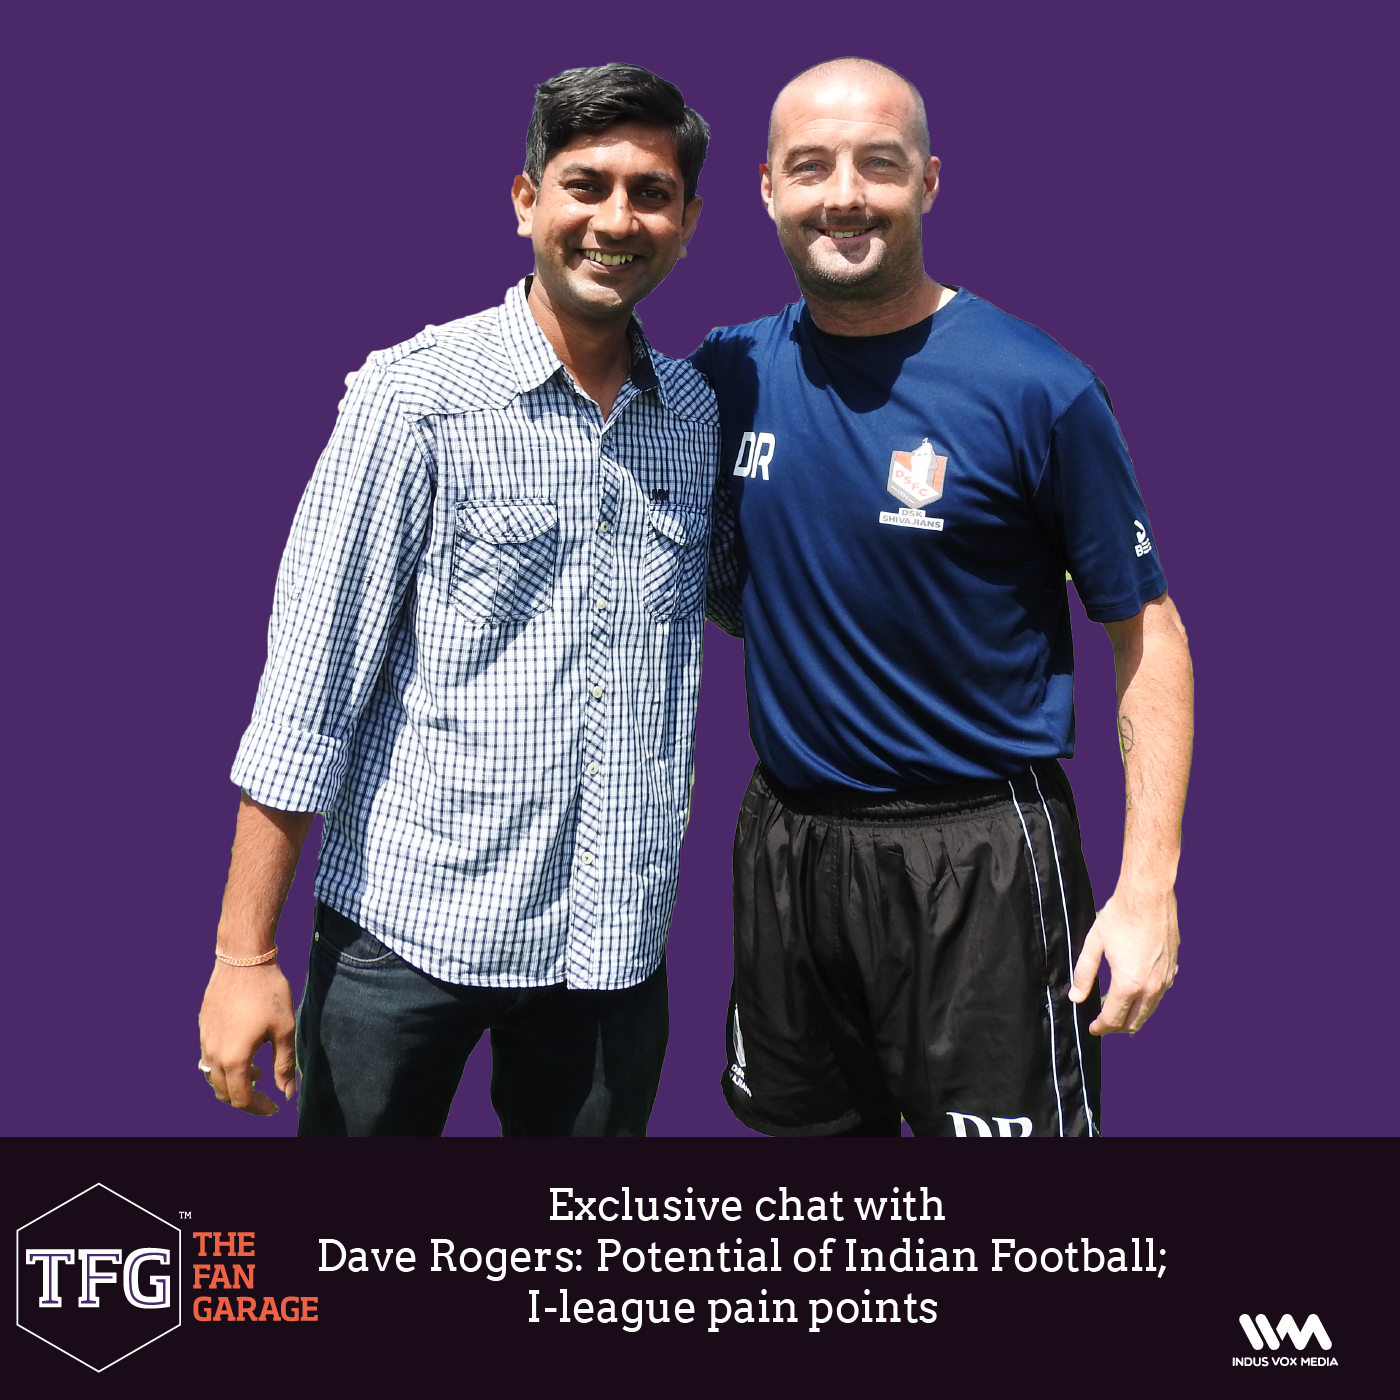 TFG interviews Ep. 008: Exclusive chat with Dave Rogers: Potential of Indian Football; I-league pain points